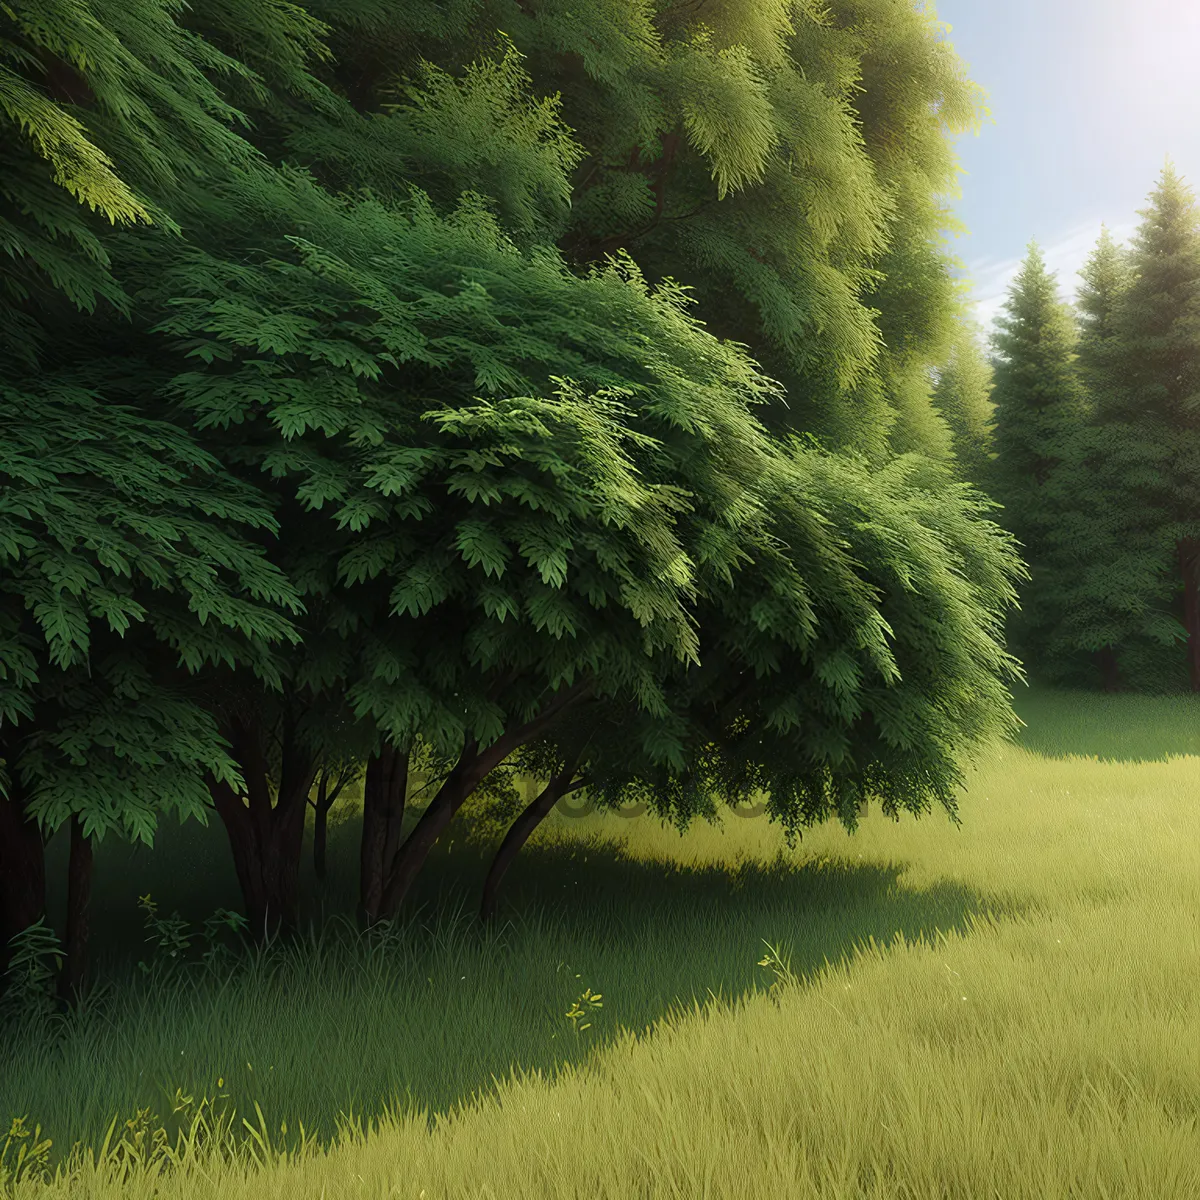 Picture of Willow Tree in Serene Forest Landscape